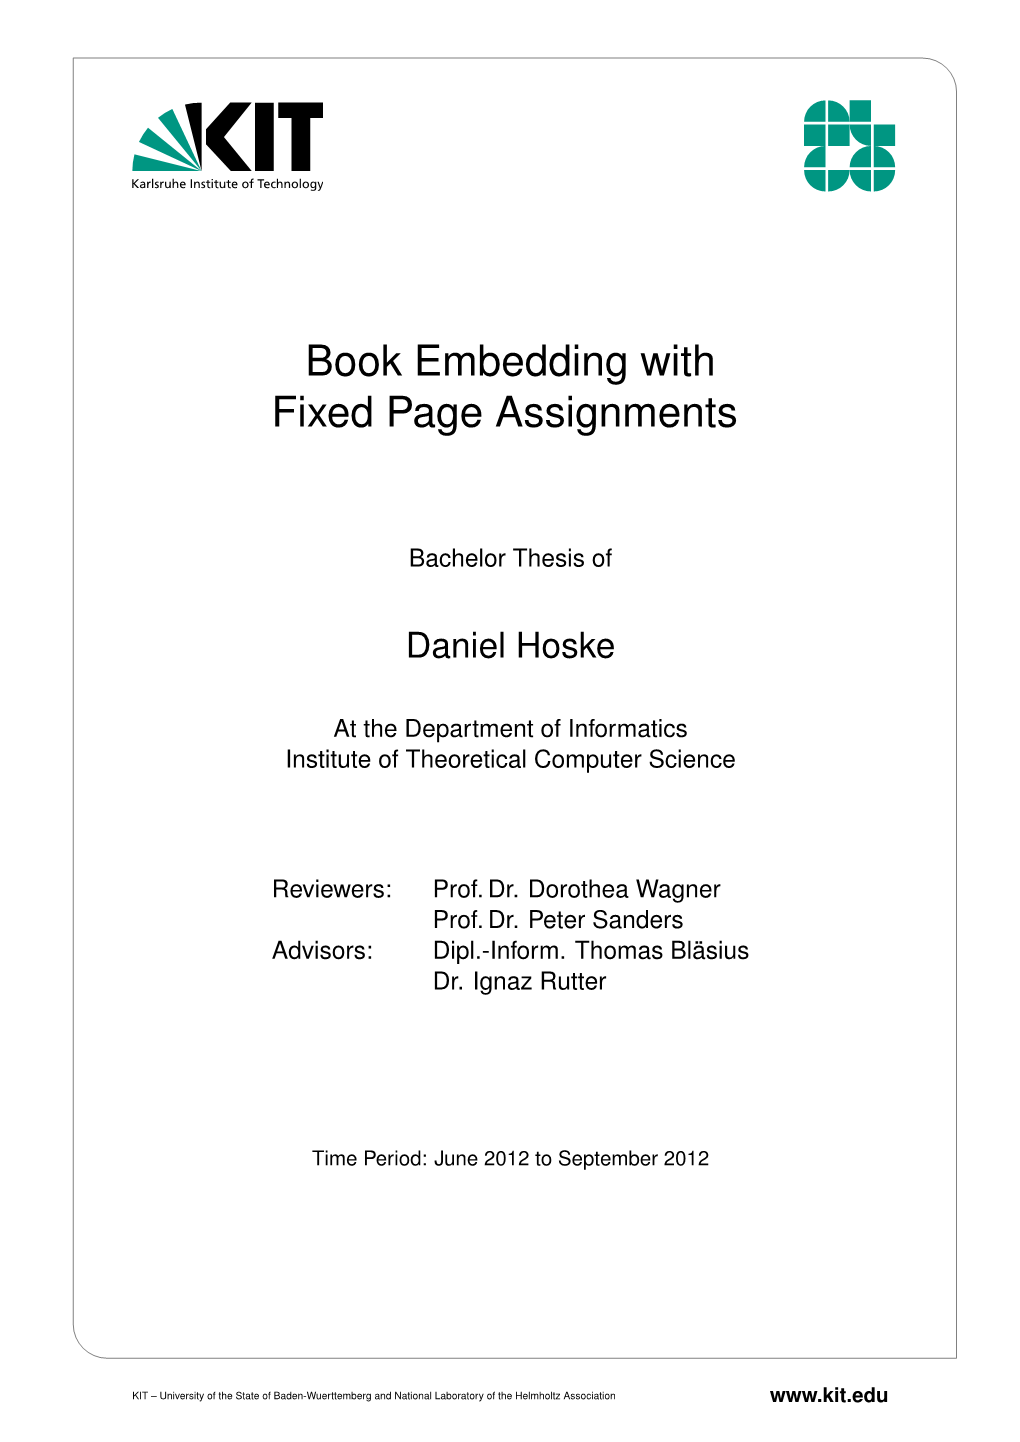 Book Embedding with Fixed Page Assignments